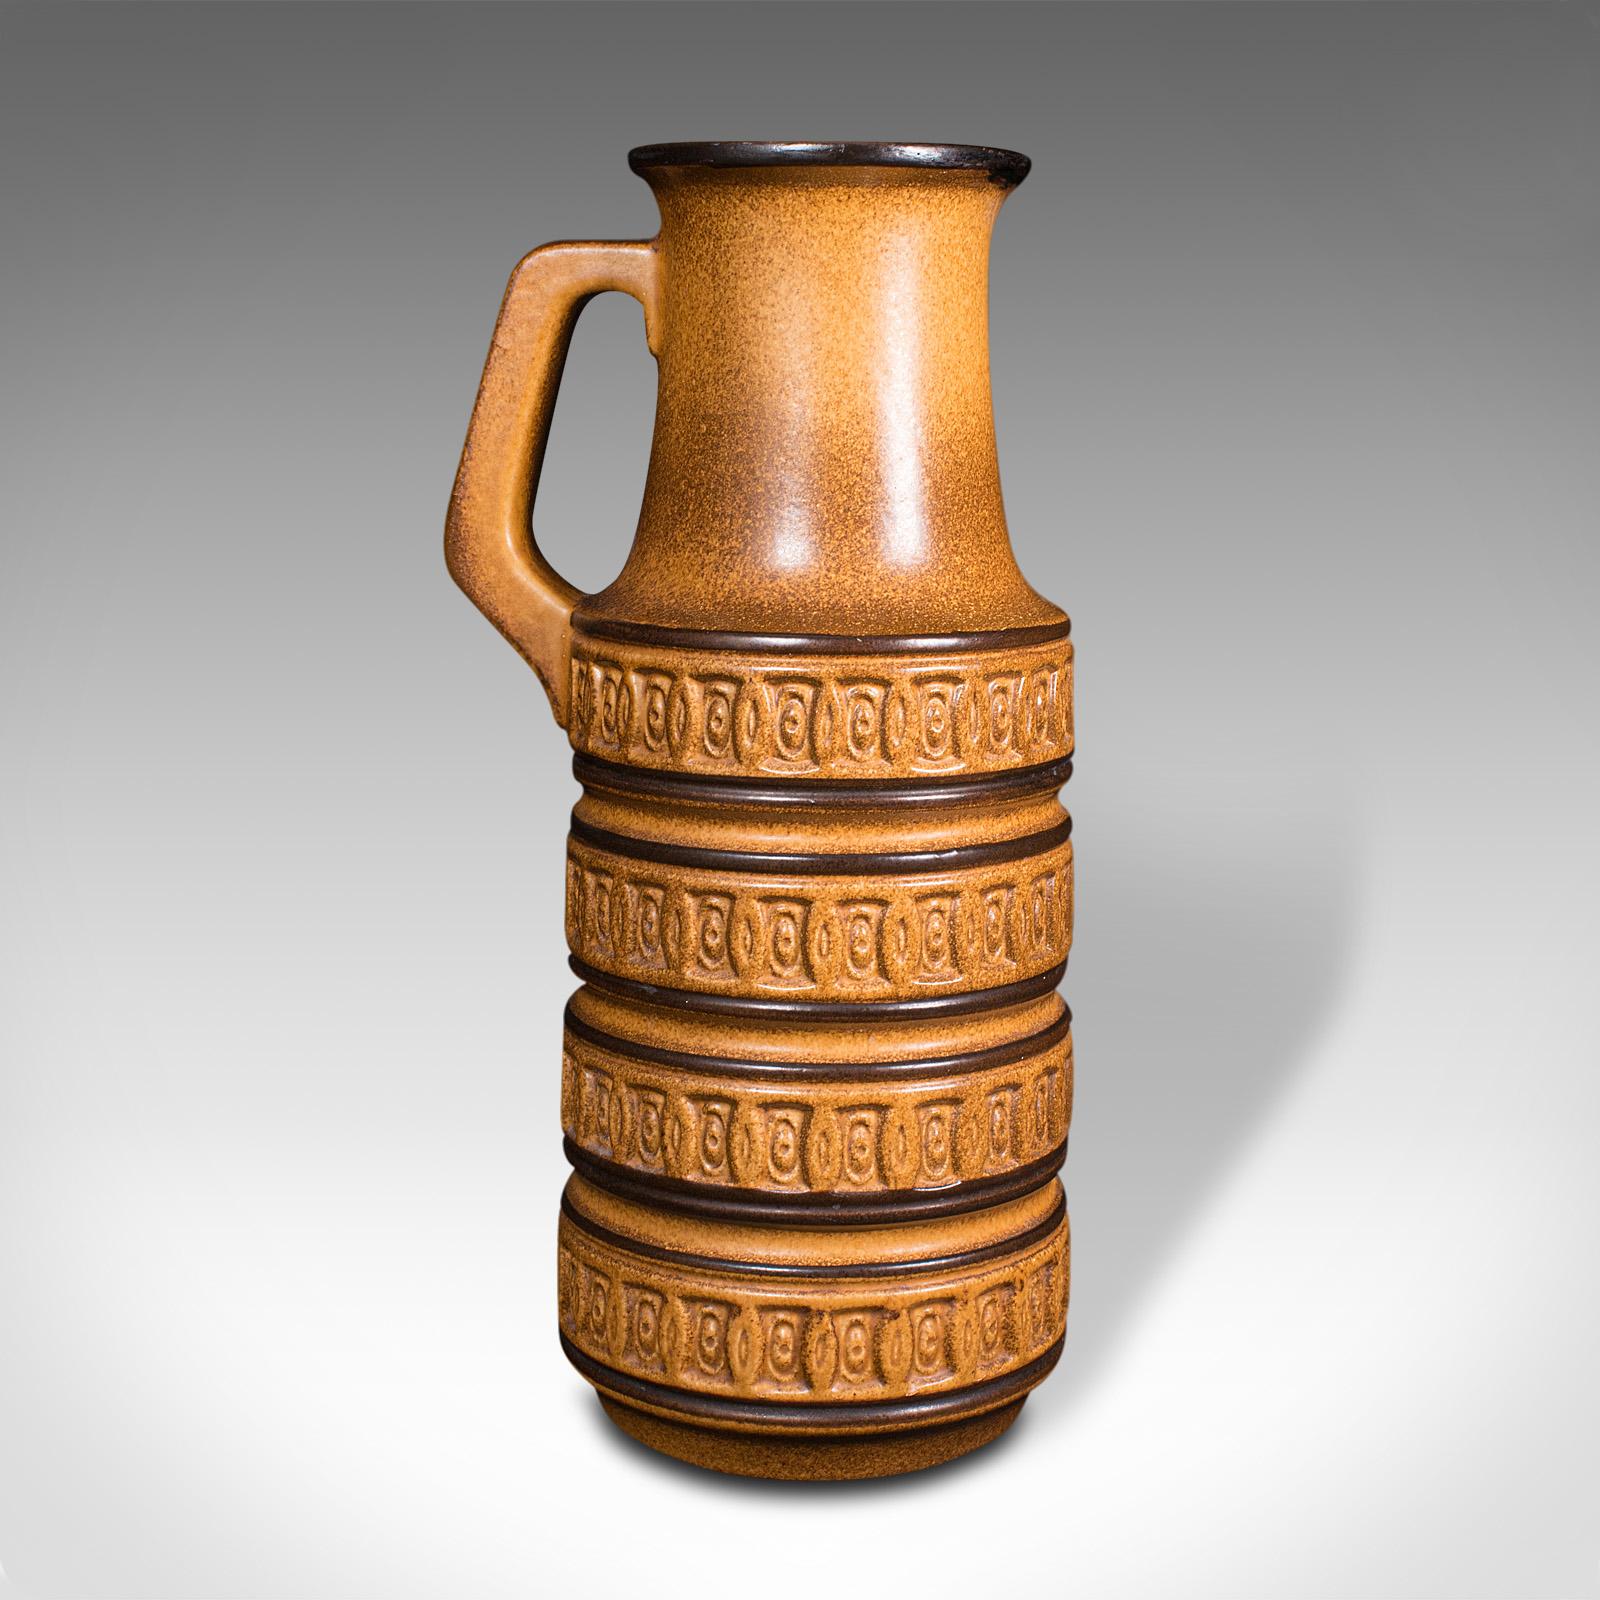 This is a tall vintage decorative jug. A German, ceramic lava pattern serving ewer or vase, dating to the late 20th century, circa 1970.

A bold, vibrant jug with an appropriately late 20th century taste
Displaying a desirable aged patina and in